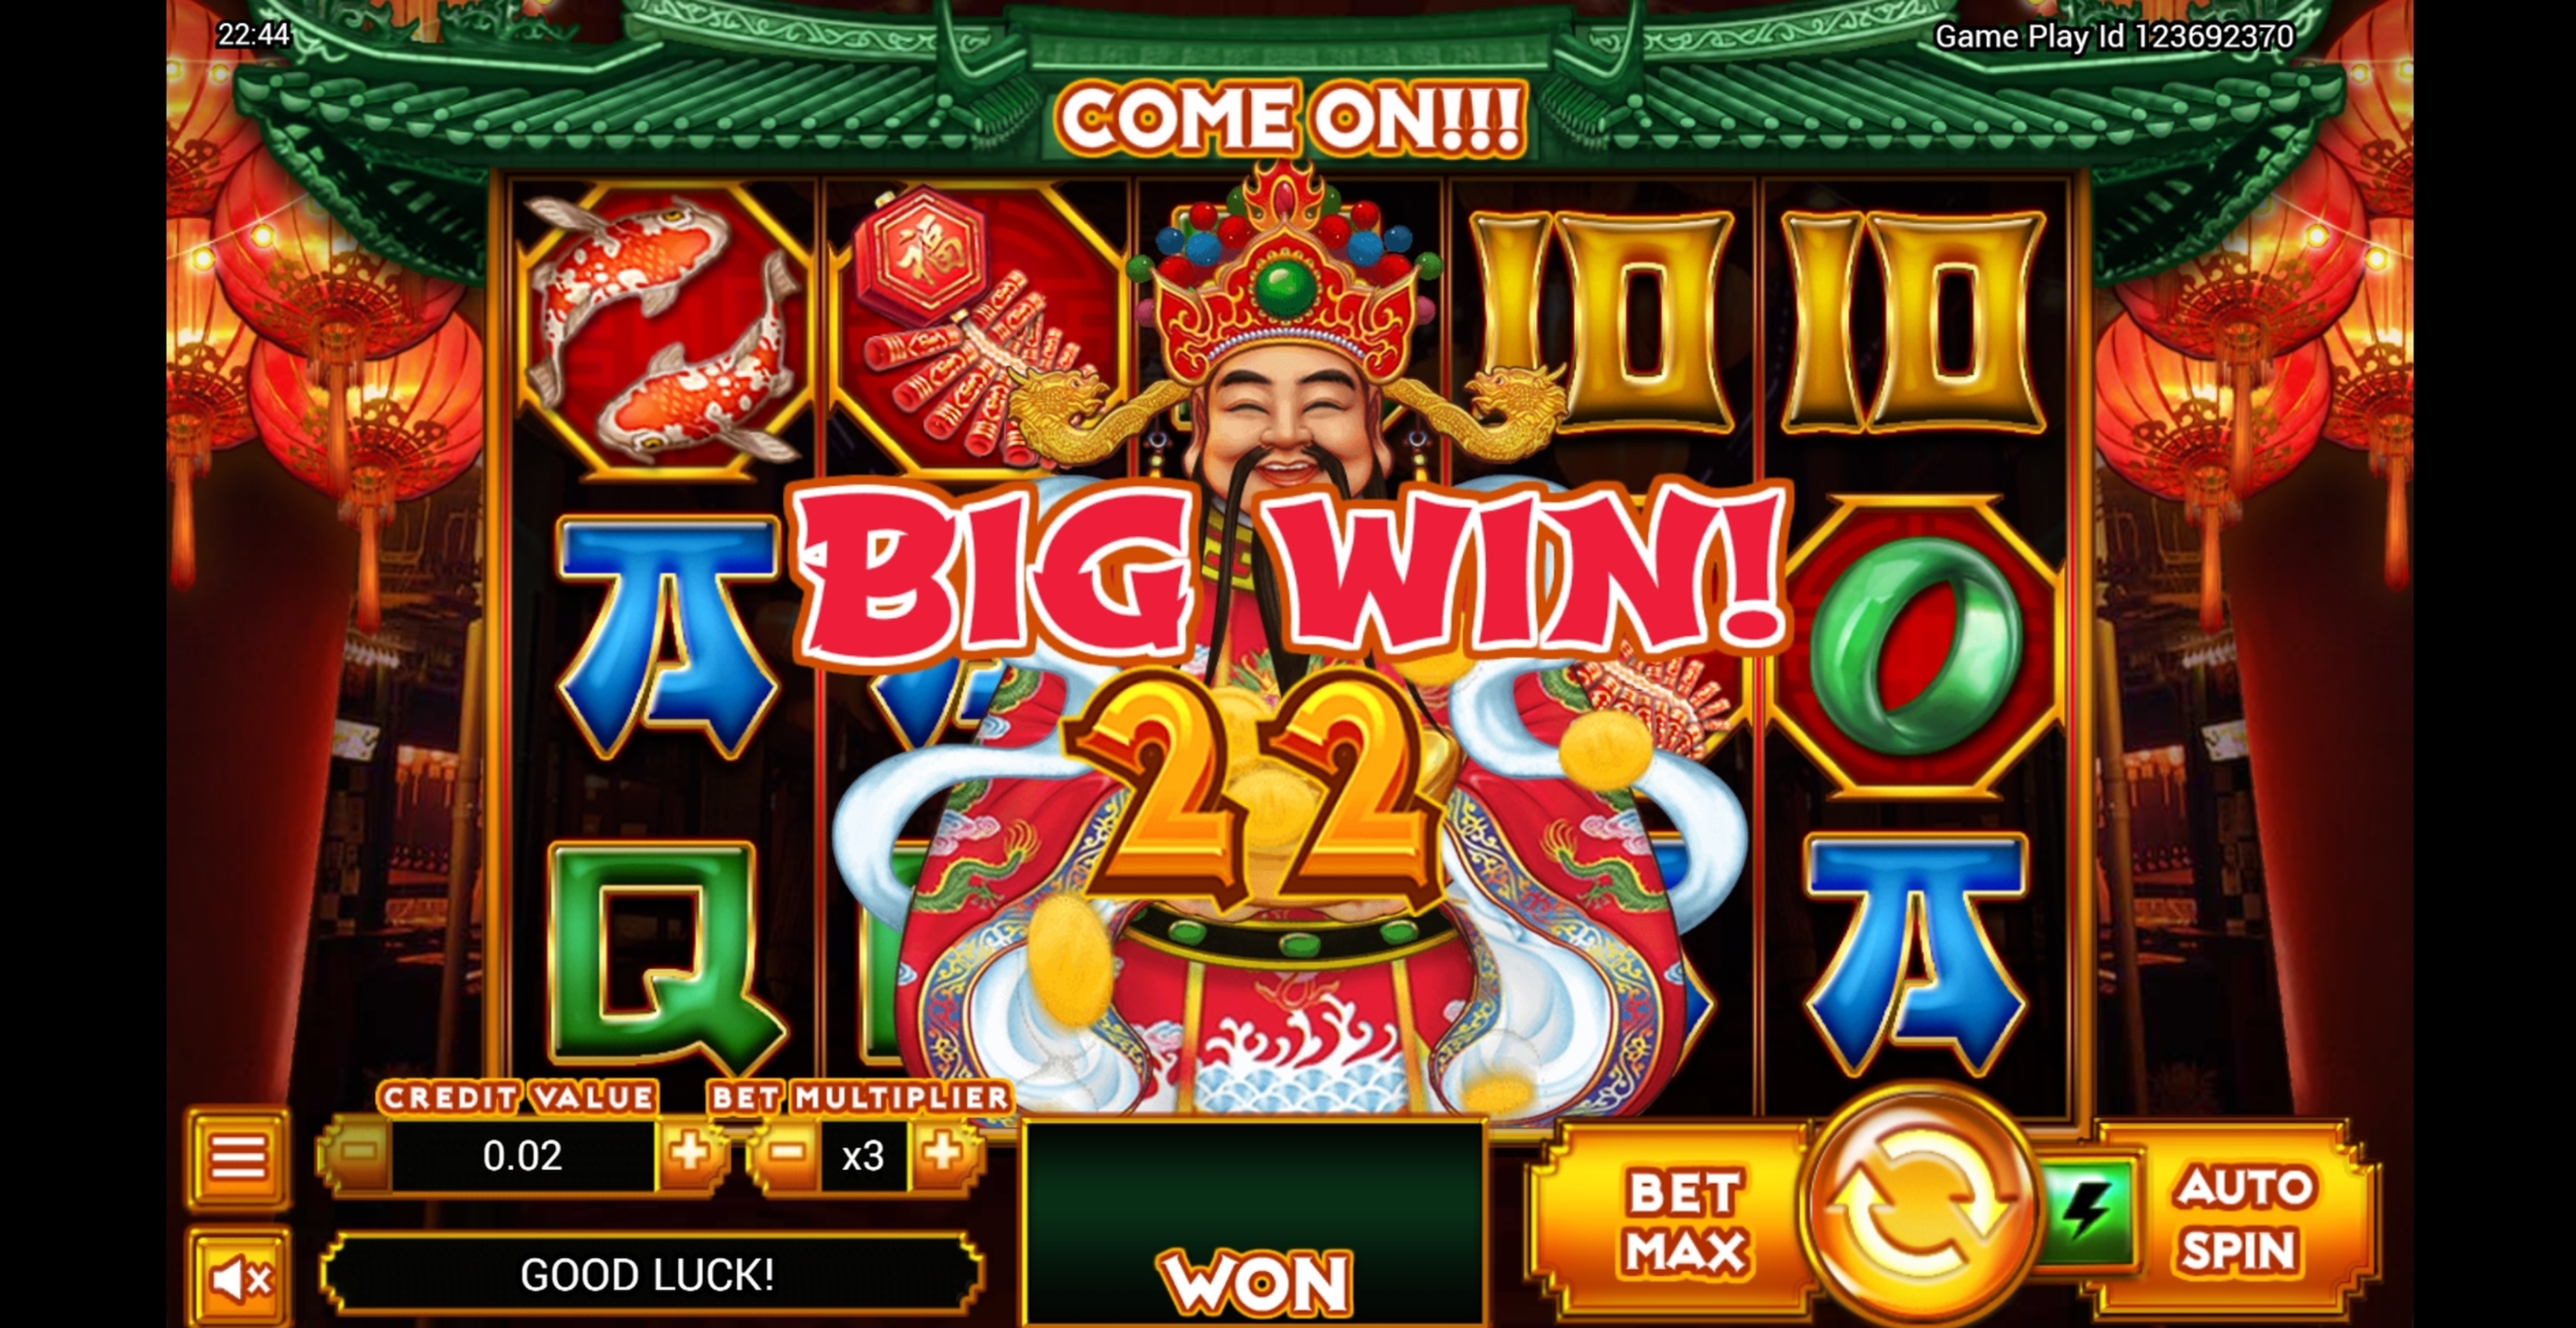 Win Money in Ying Cai Shen Free Slot Game by Skywind